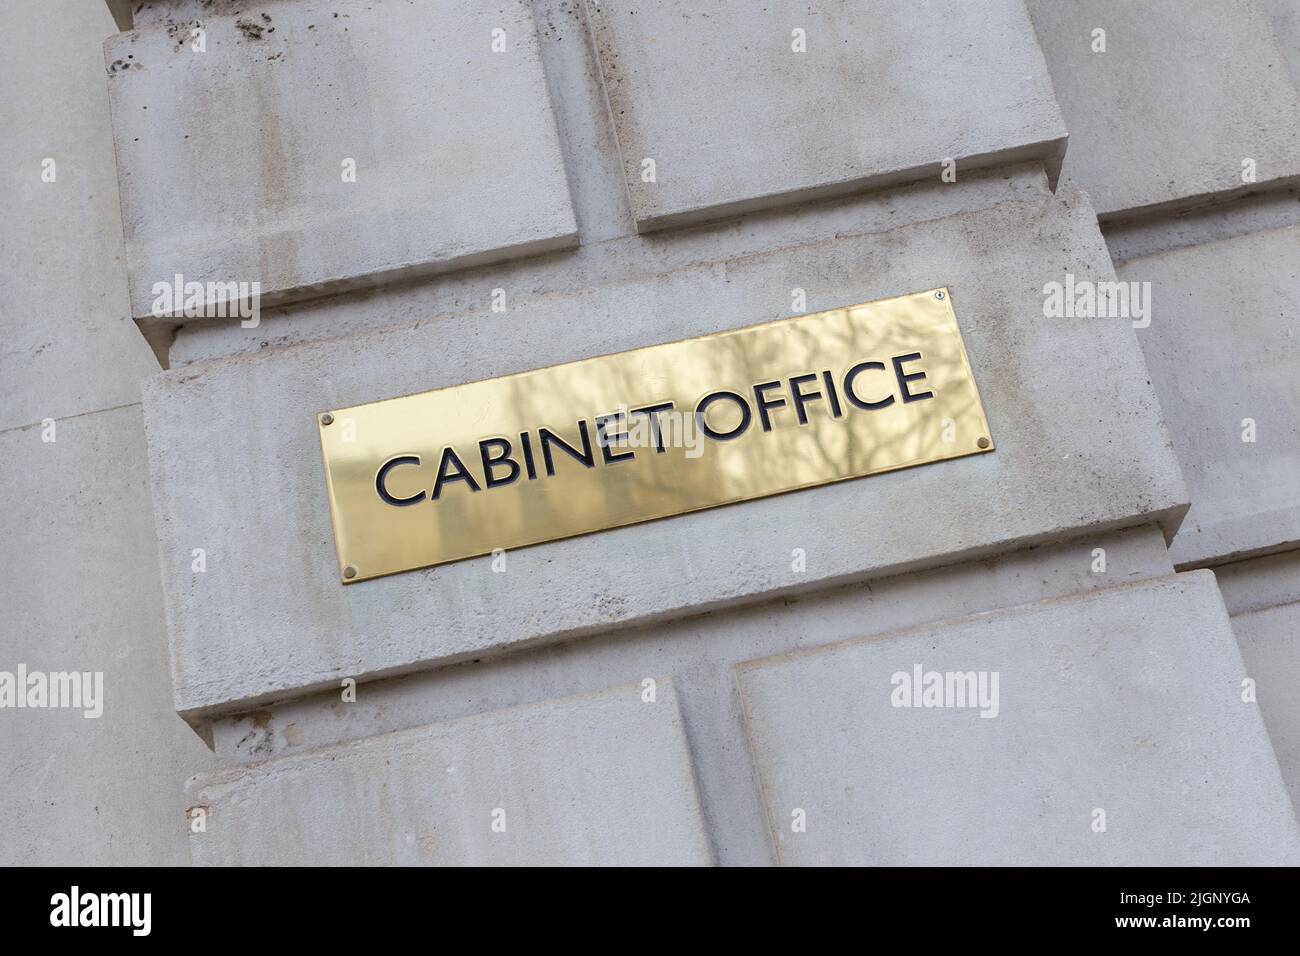 Cabinet office sign, Whitehall, London, England Stock Photo